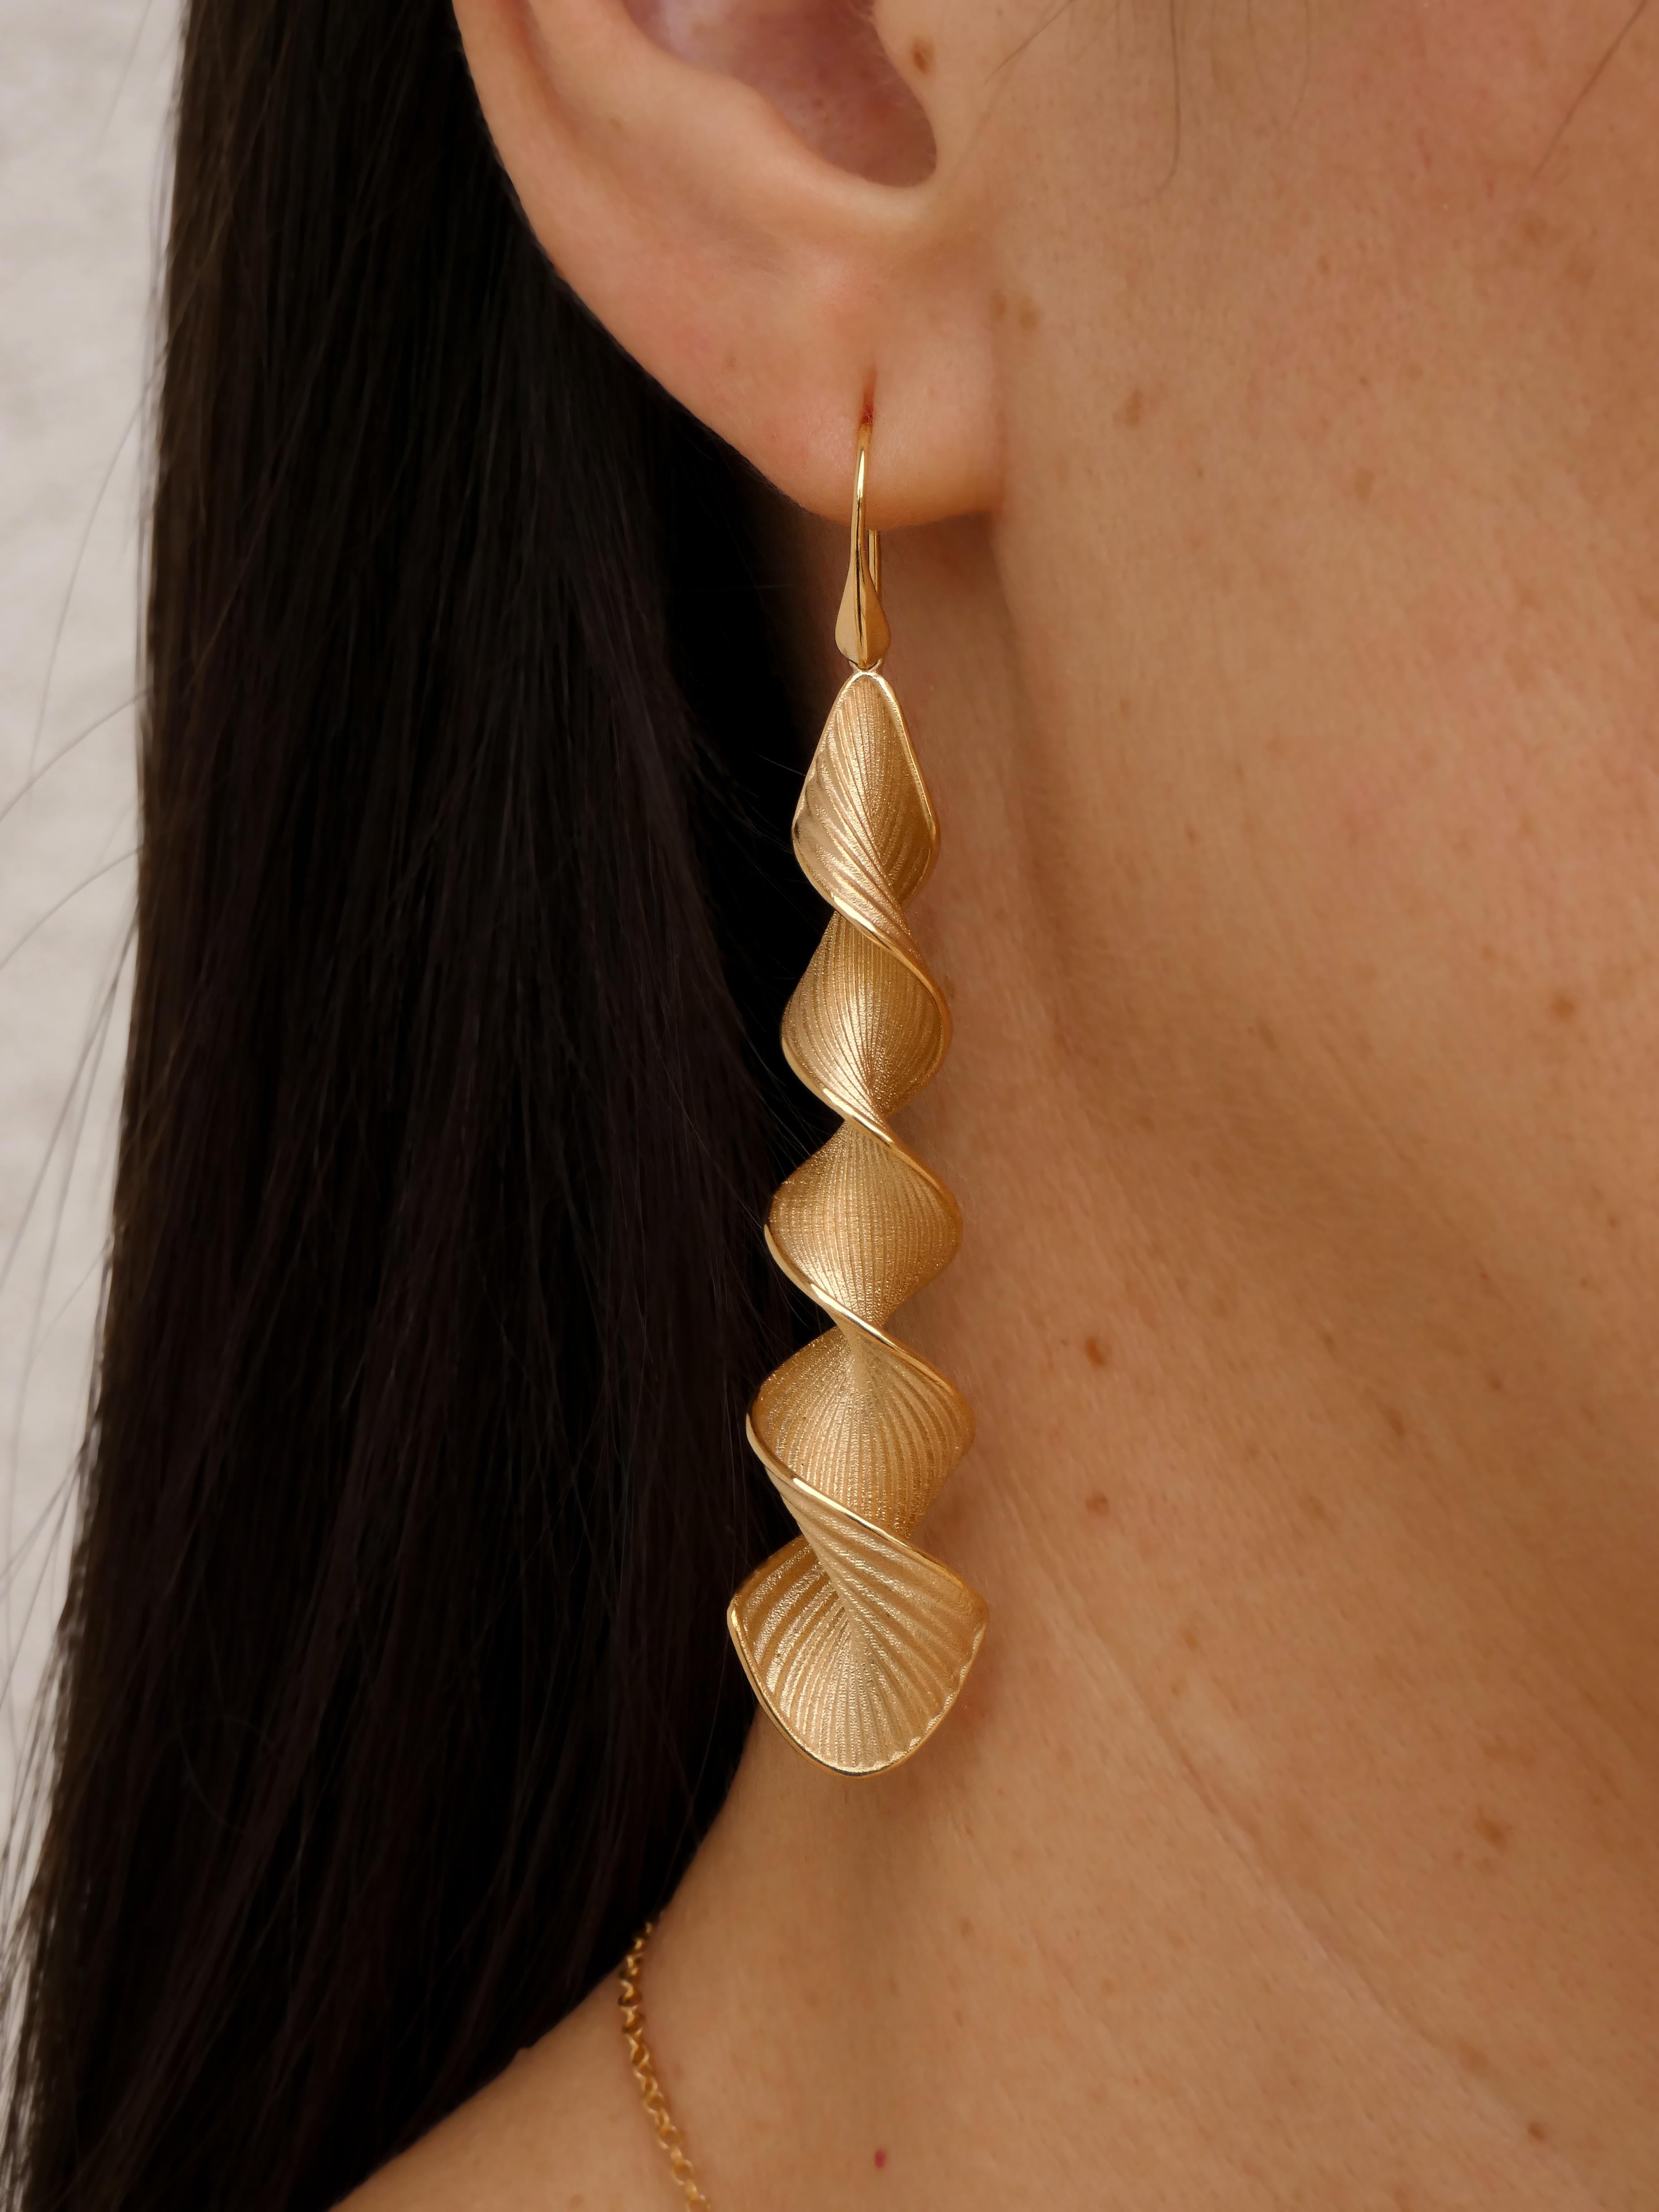 Made to order, Oltremare Gioielli 14k yellow gold earrings made in Italy. Long teardrop earrings in 14k yellow gold. 10.5 grams total weight.
Only one pair ready to ship. Long twisted drop earrings with hook in genuine 14k solid gold made in Italy